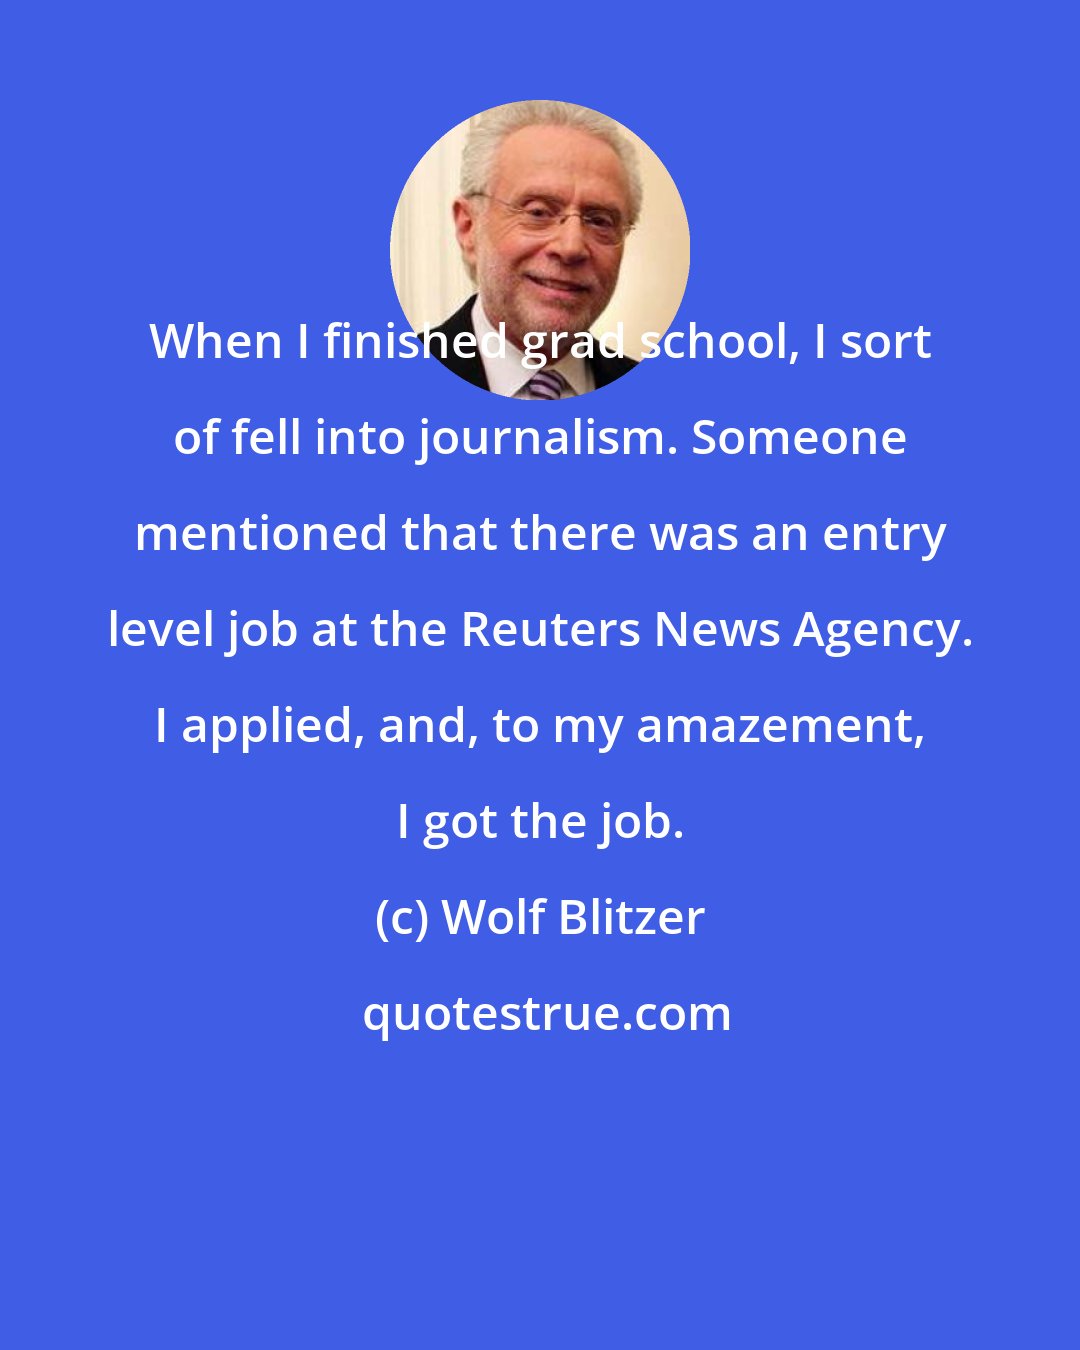 Wolf Blitzer: When I finished grad school, I sort of fell into journalism. Someone mentioned that there was an entry level job at the Reuters News Agency. I applied, and, to my amazement, I got the job.